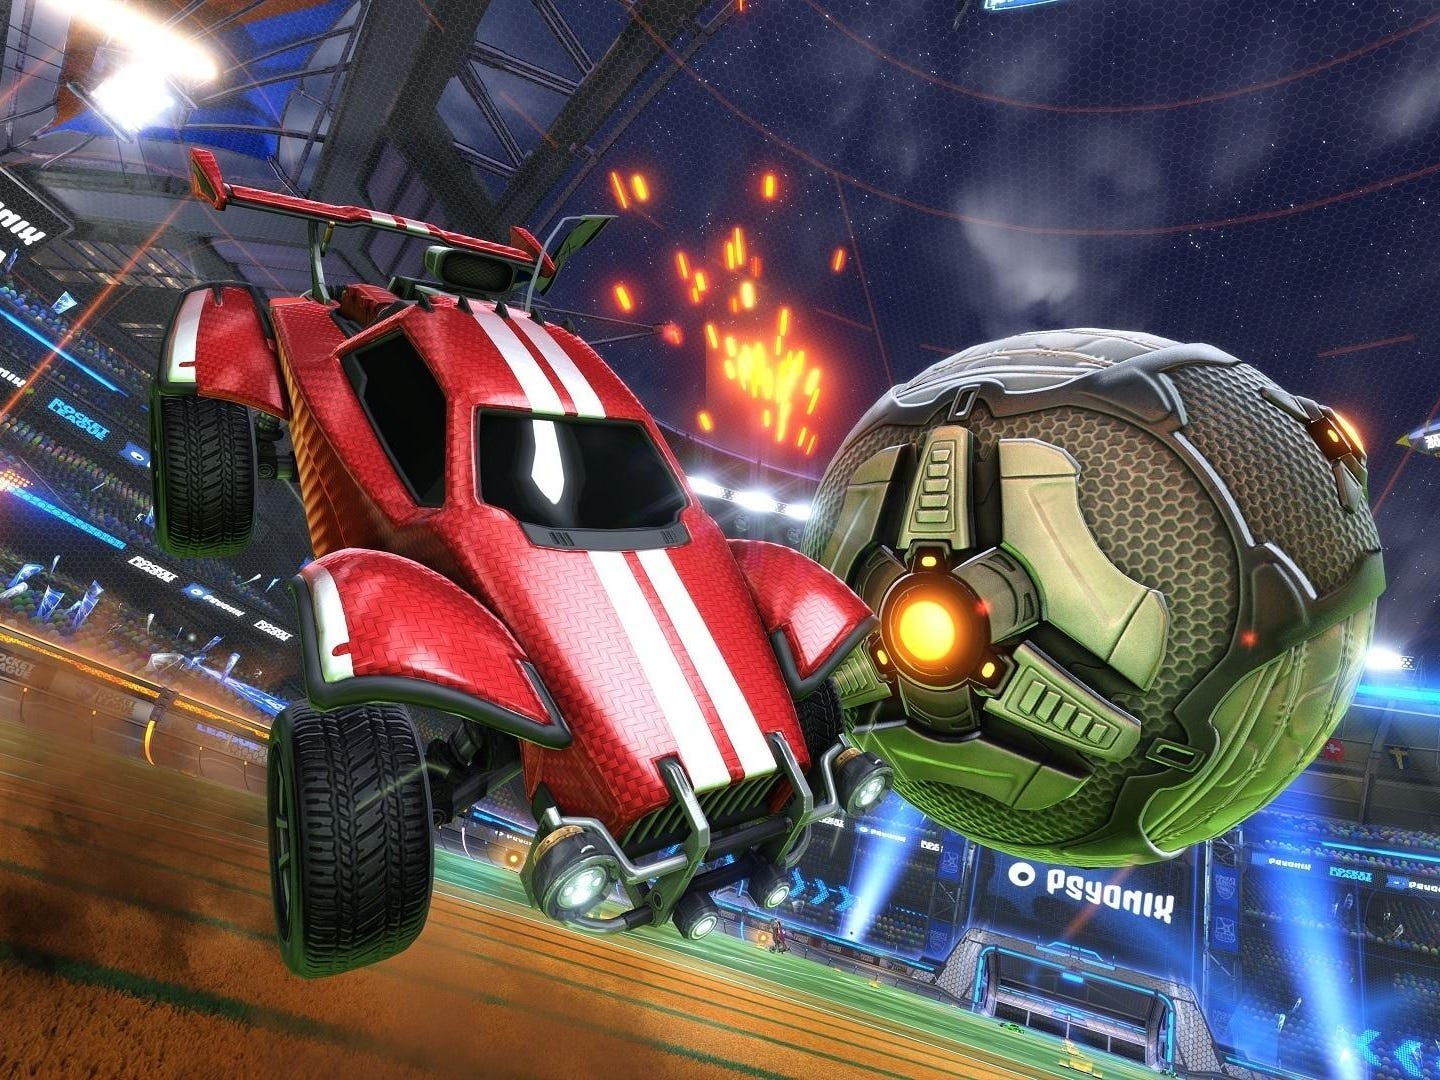 Rocket League combines the racing of cars with the action of soccer